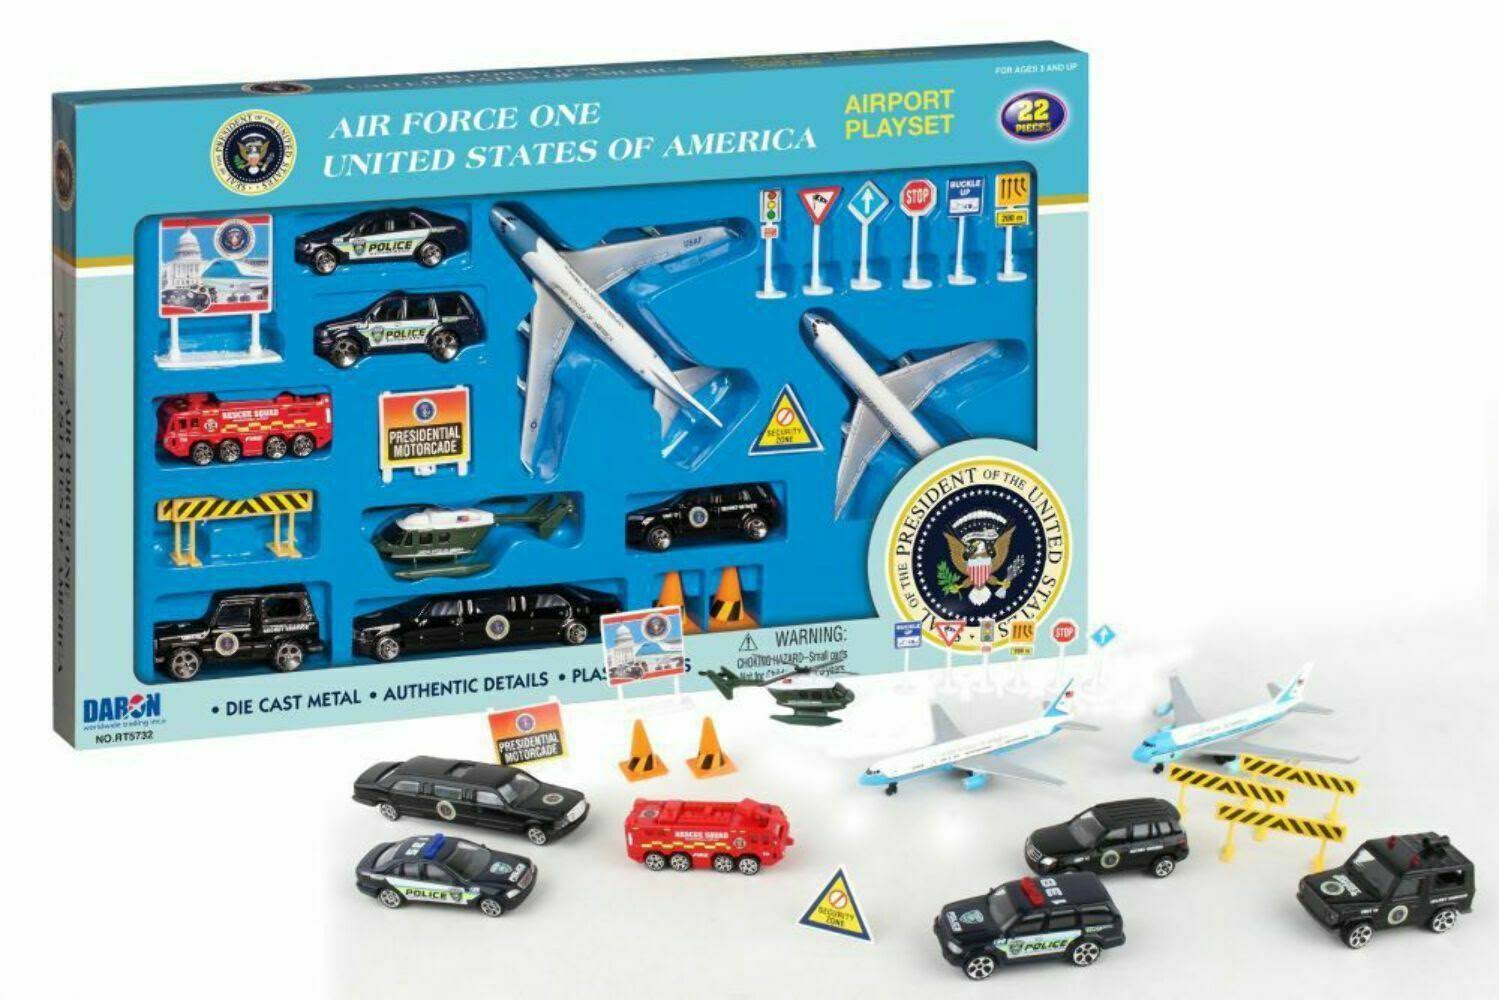 Daron Worldwide Trading Air Force One Play Set - 30pcs